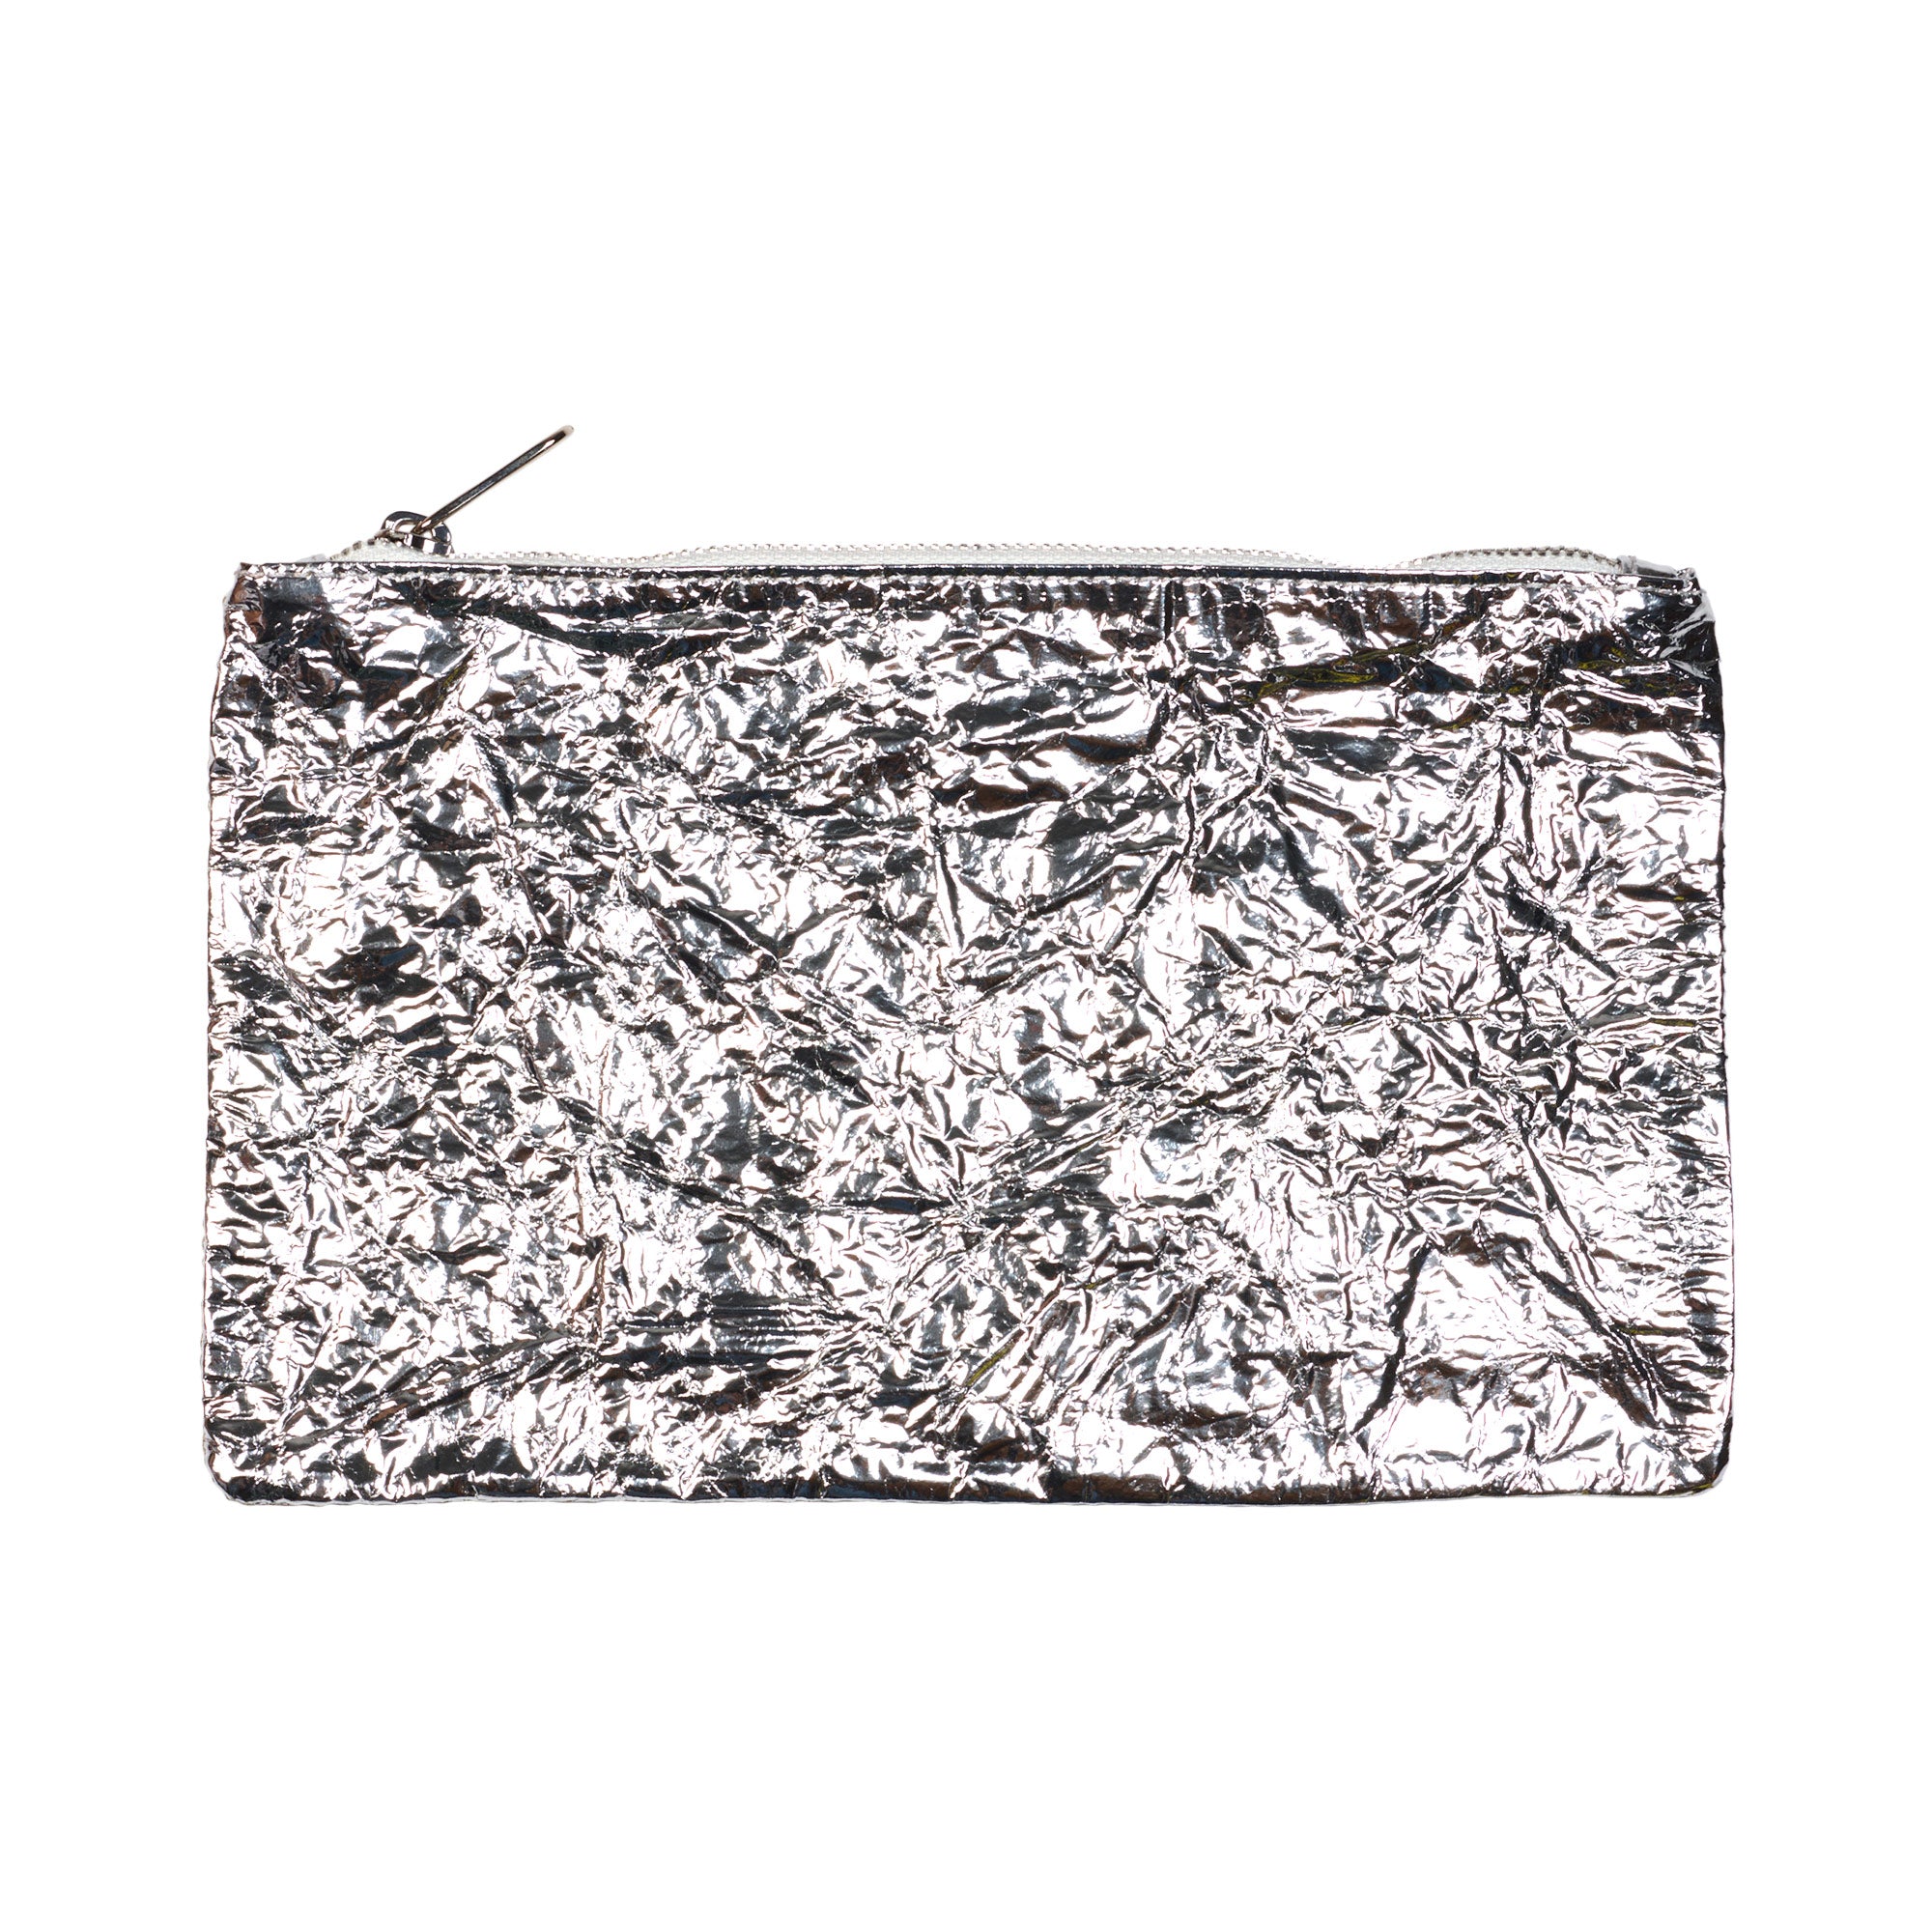 Leather Embellished Medium Pouch - Silver #1